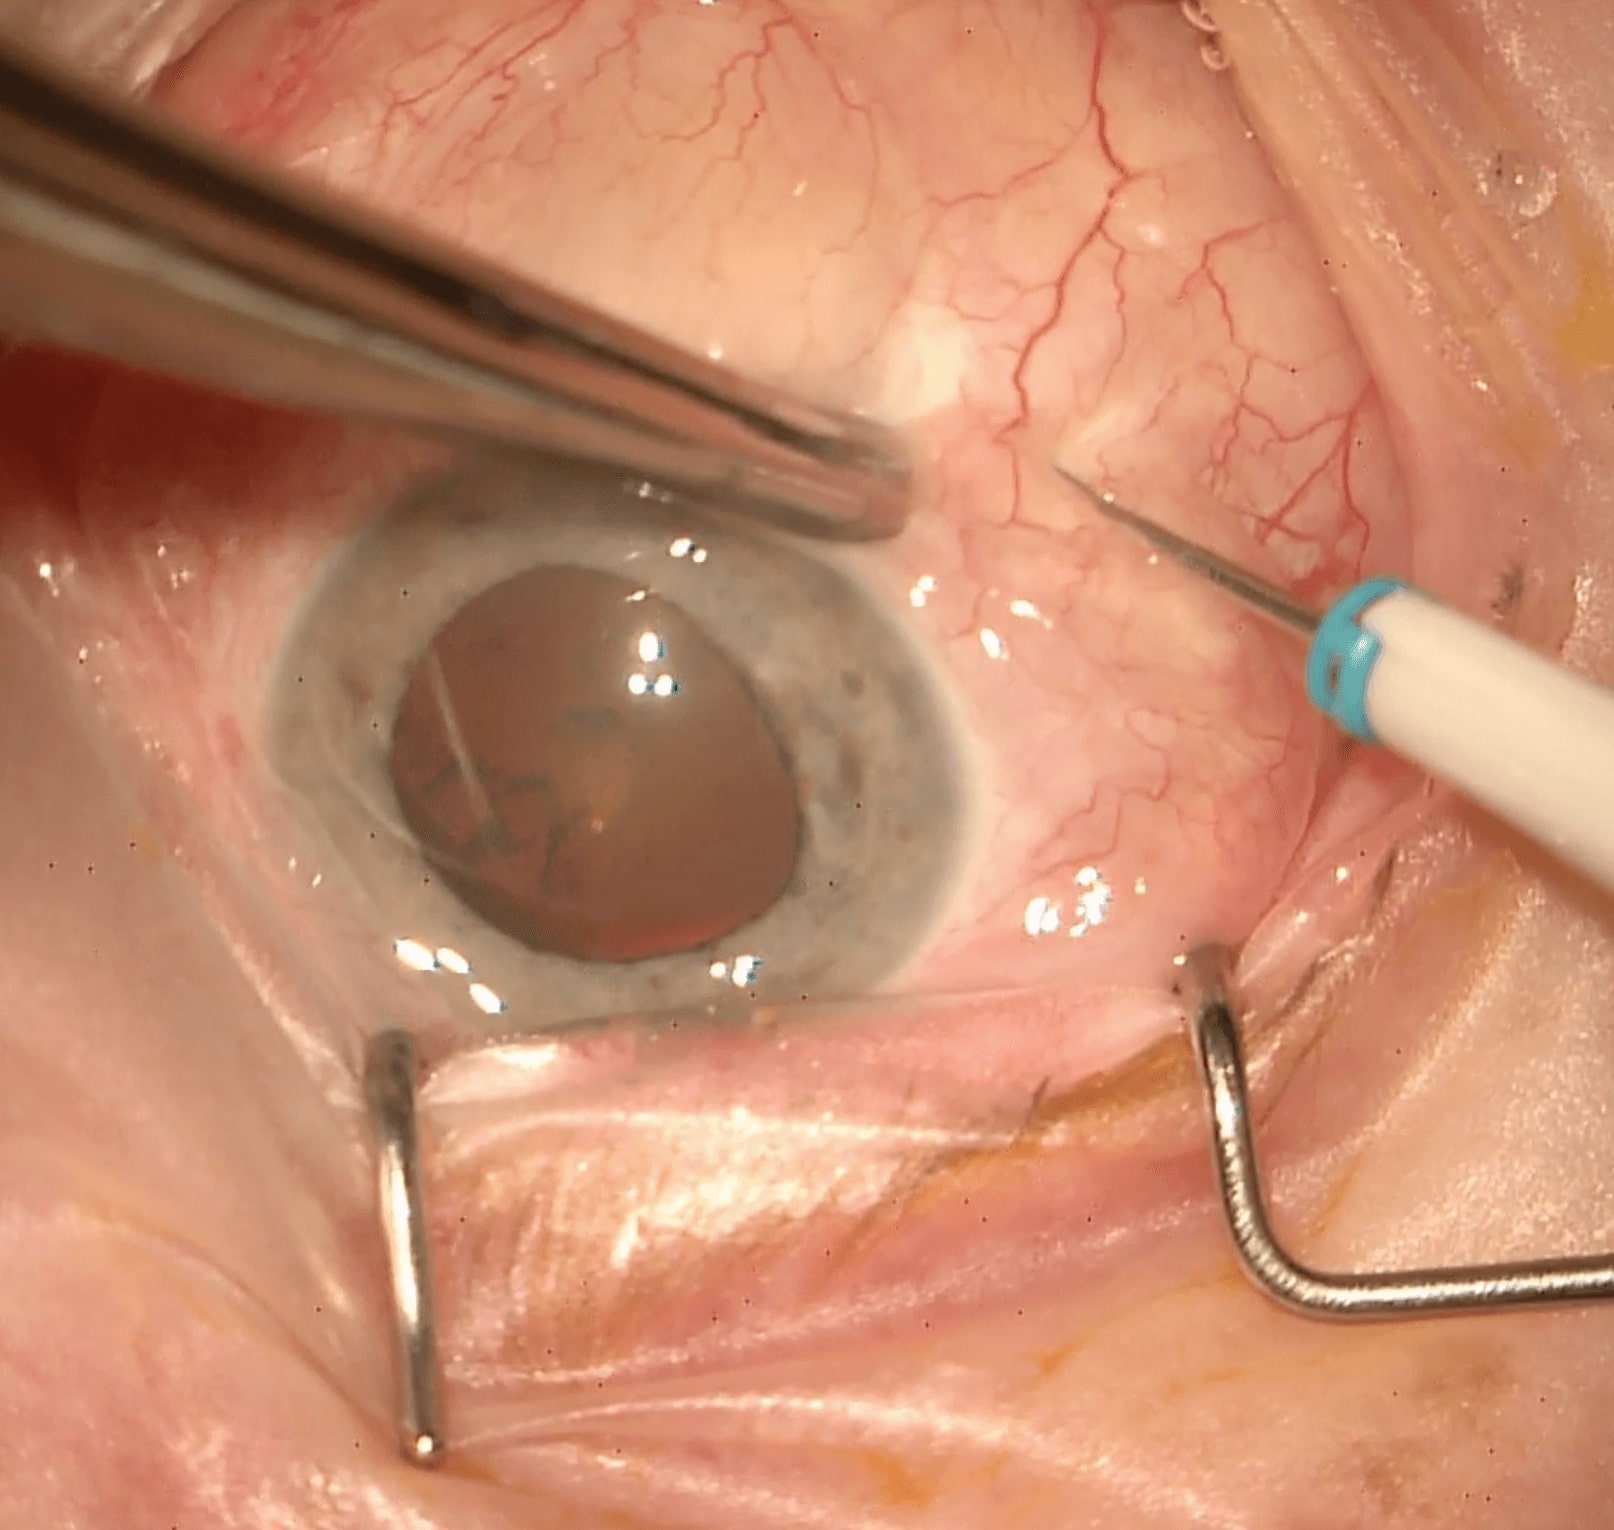 Figure 3.1.2 Insertion of a 25-gauge Valved Cannula with a Trocar System
A: Note the conjunctival displacement